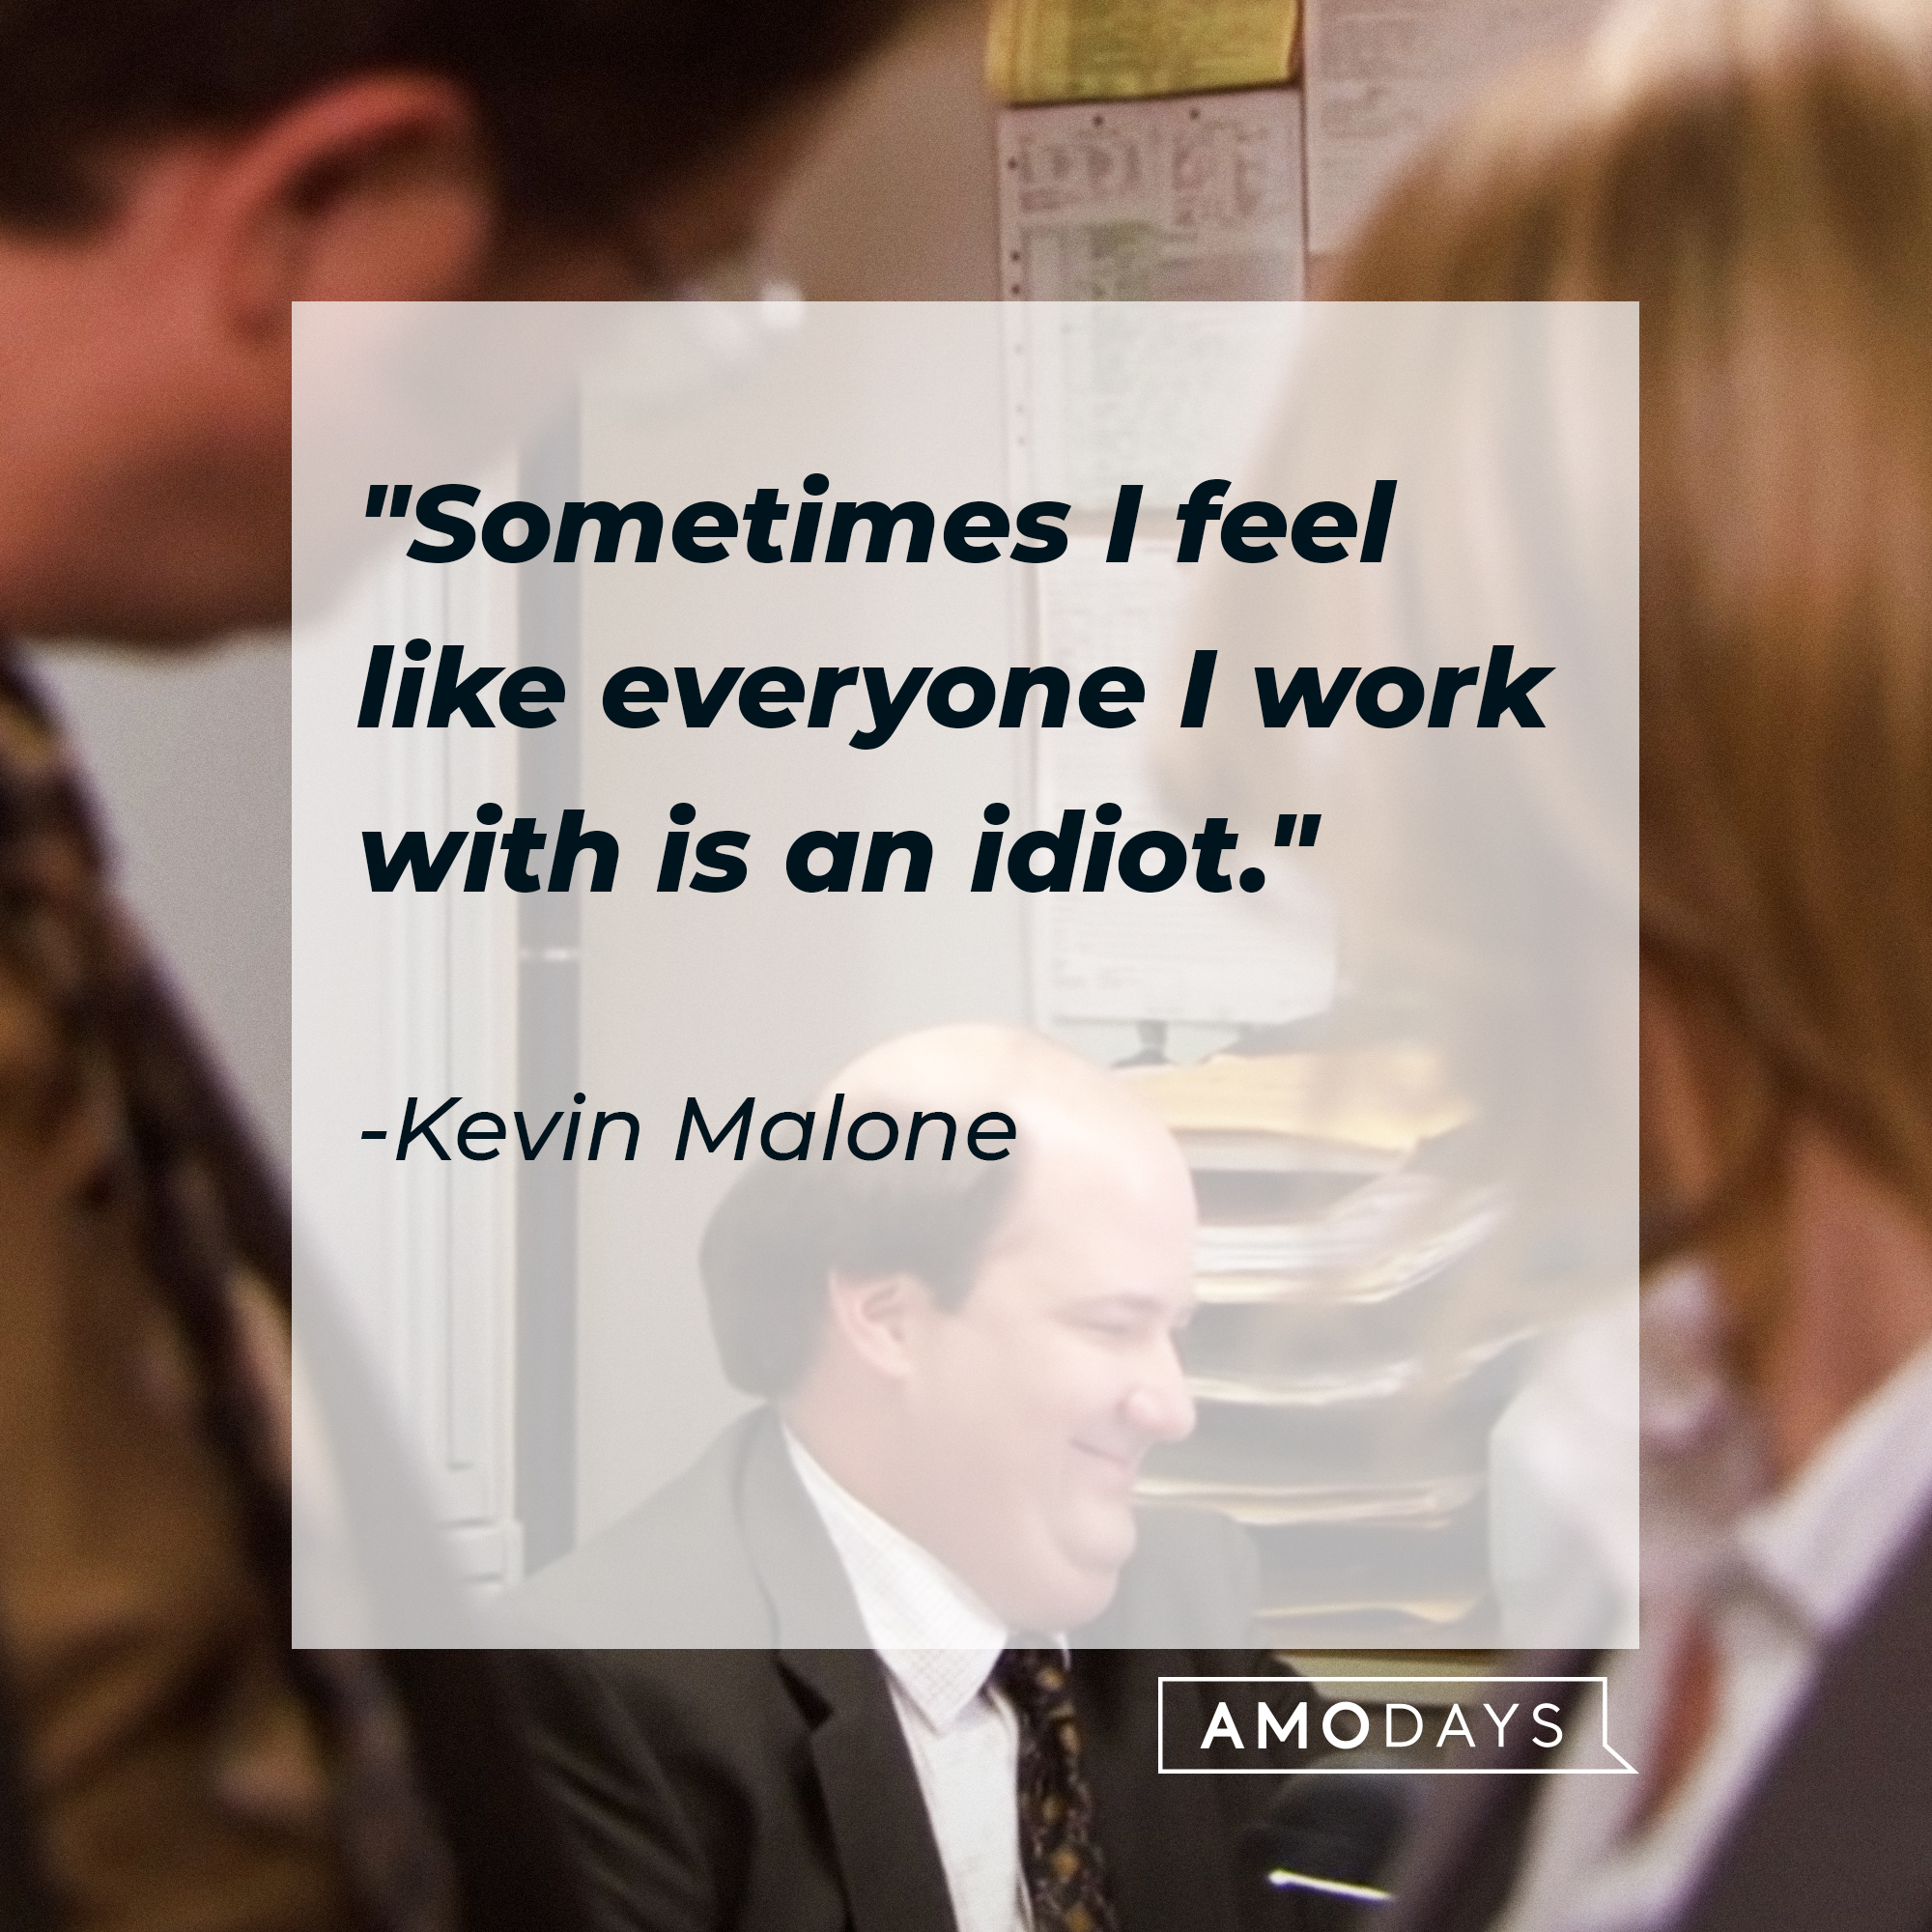 An image of Kevin Malone, with his quote:“Sometimes I feel like everyone I work with is an idiot.”   | Source: Youtube.com/The Office